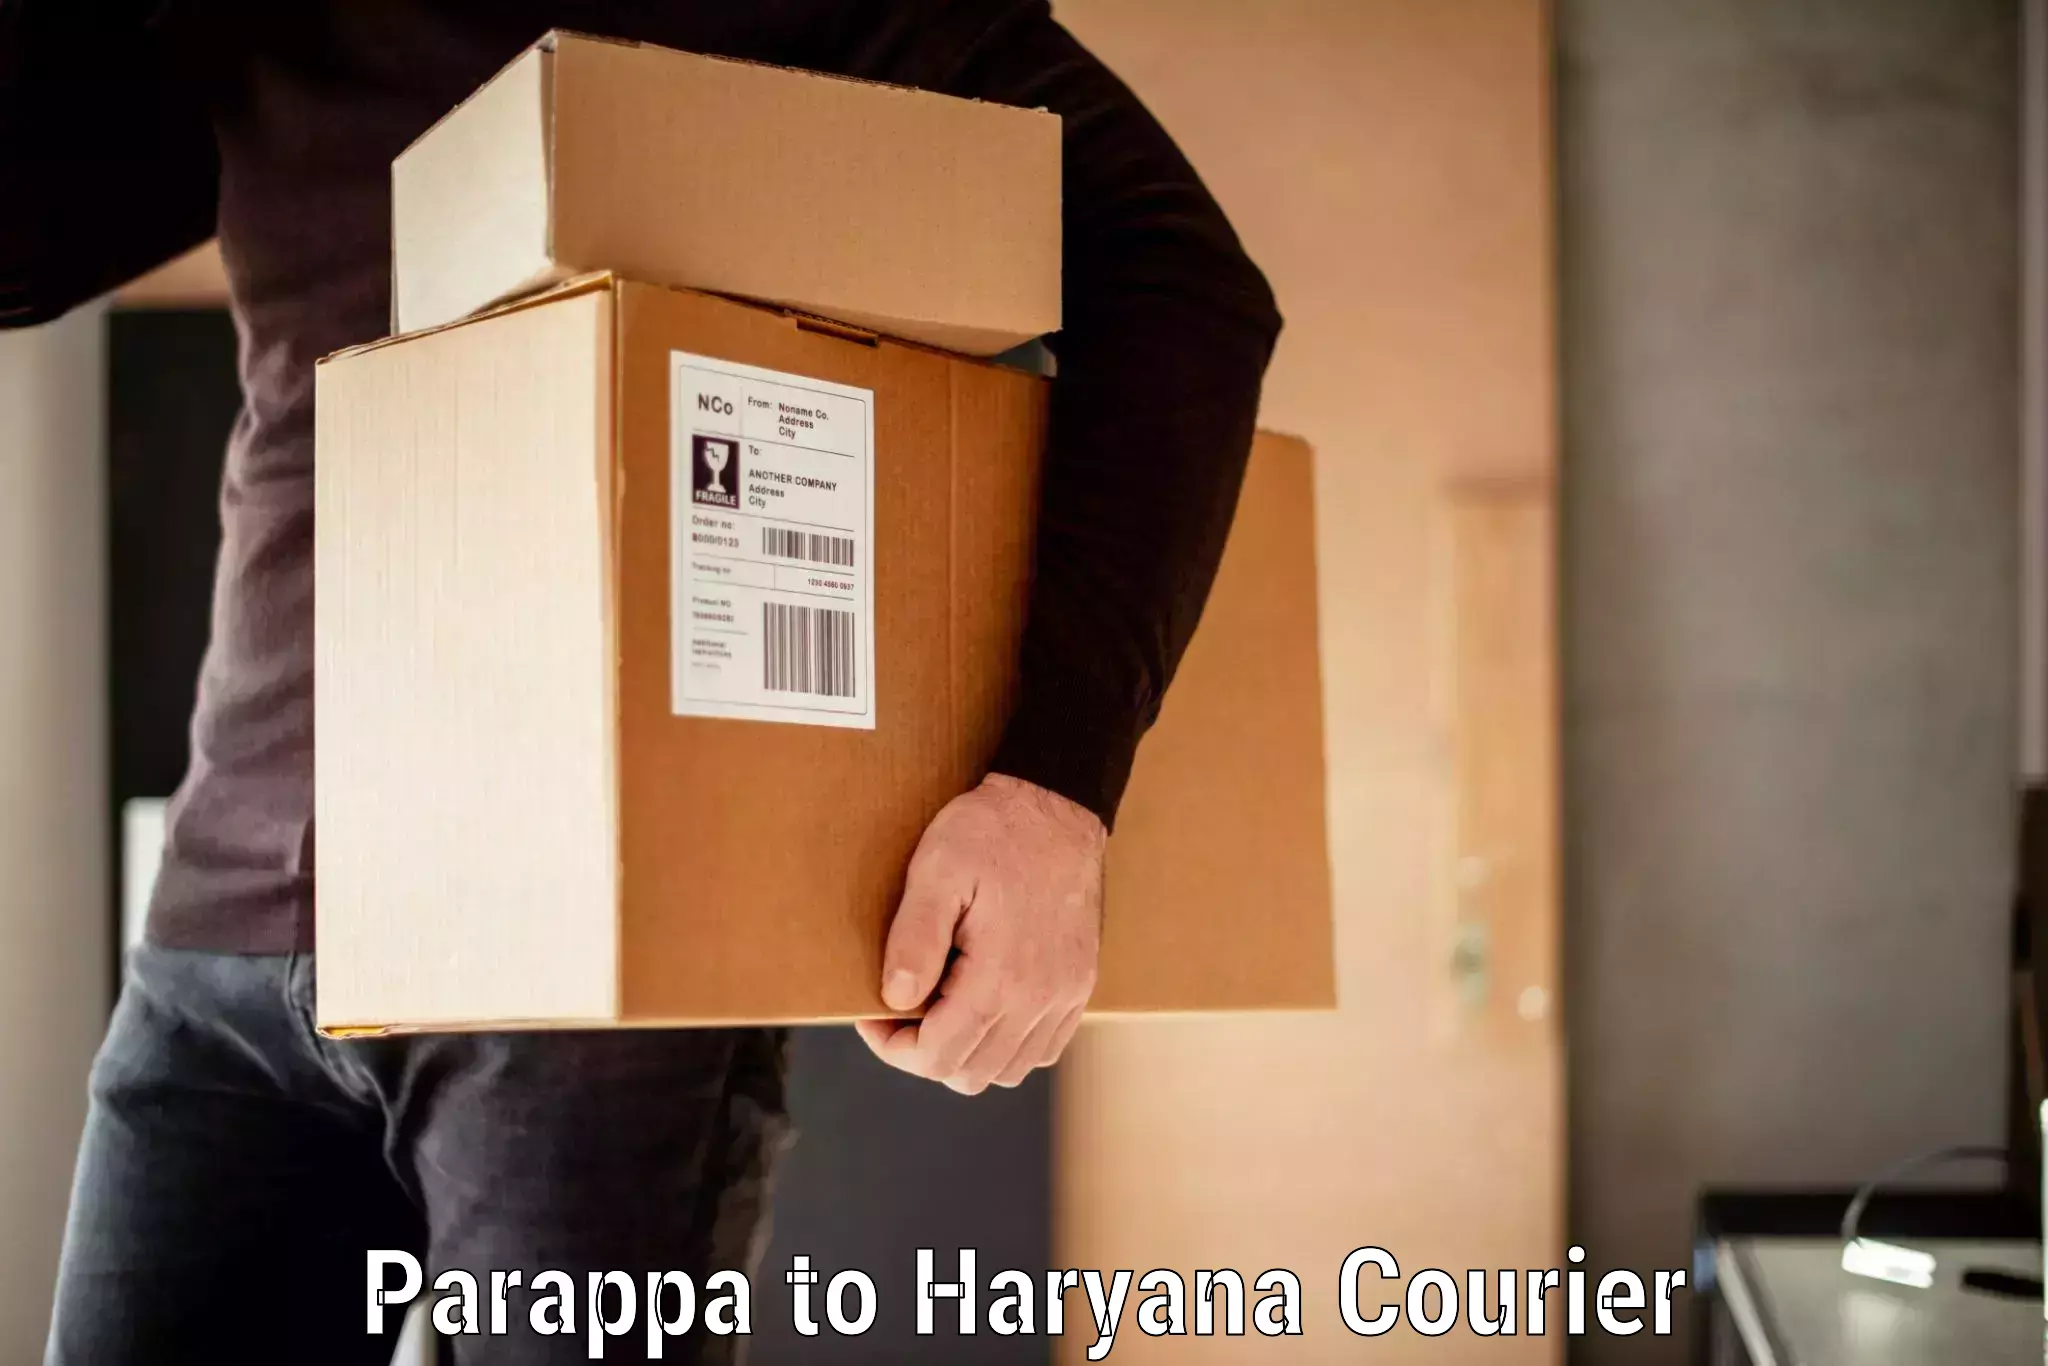 Baggage transport services in Parappa to Gurgaon